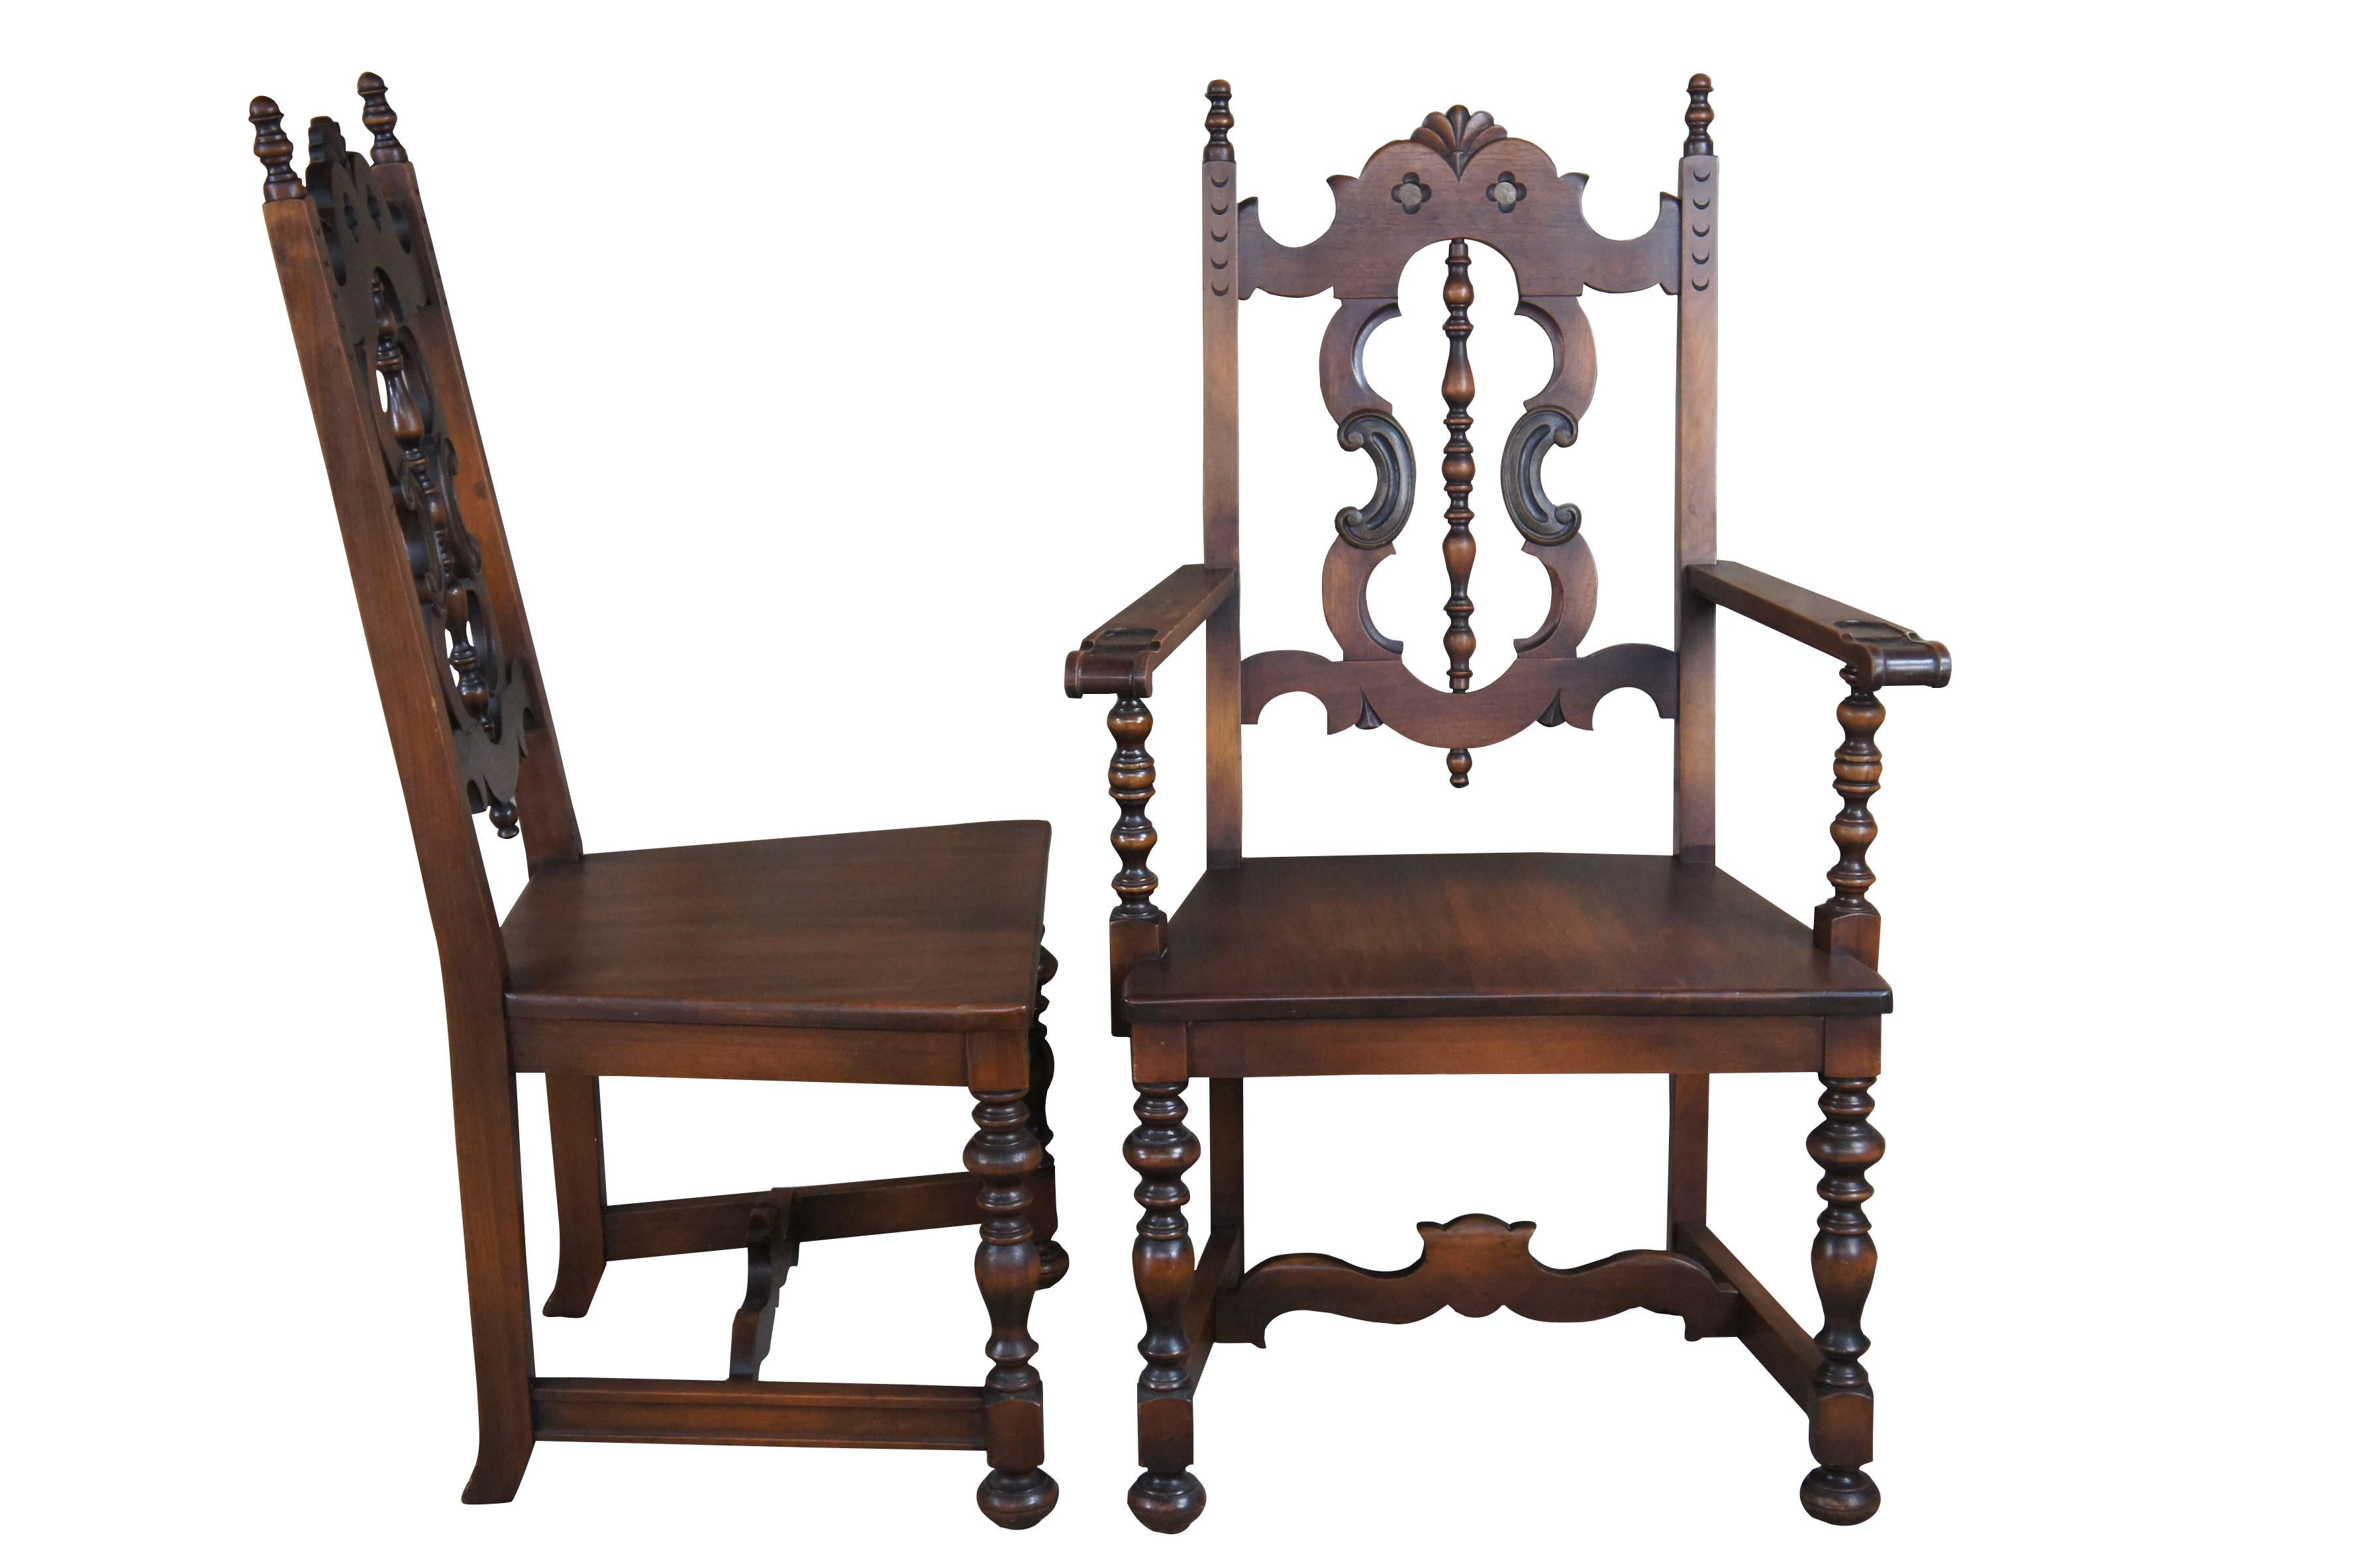 Set of six antique Life Time Furniture Jacobean / Spanish Revival dining chairs.  Made of walnut featuring Jacobean styling with turned supports, pierced back, serpentine accents and finials.

In the late 19th century and early 20th century most